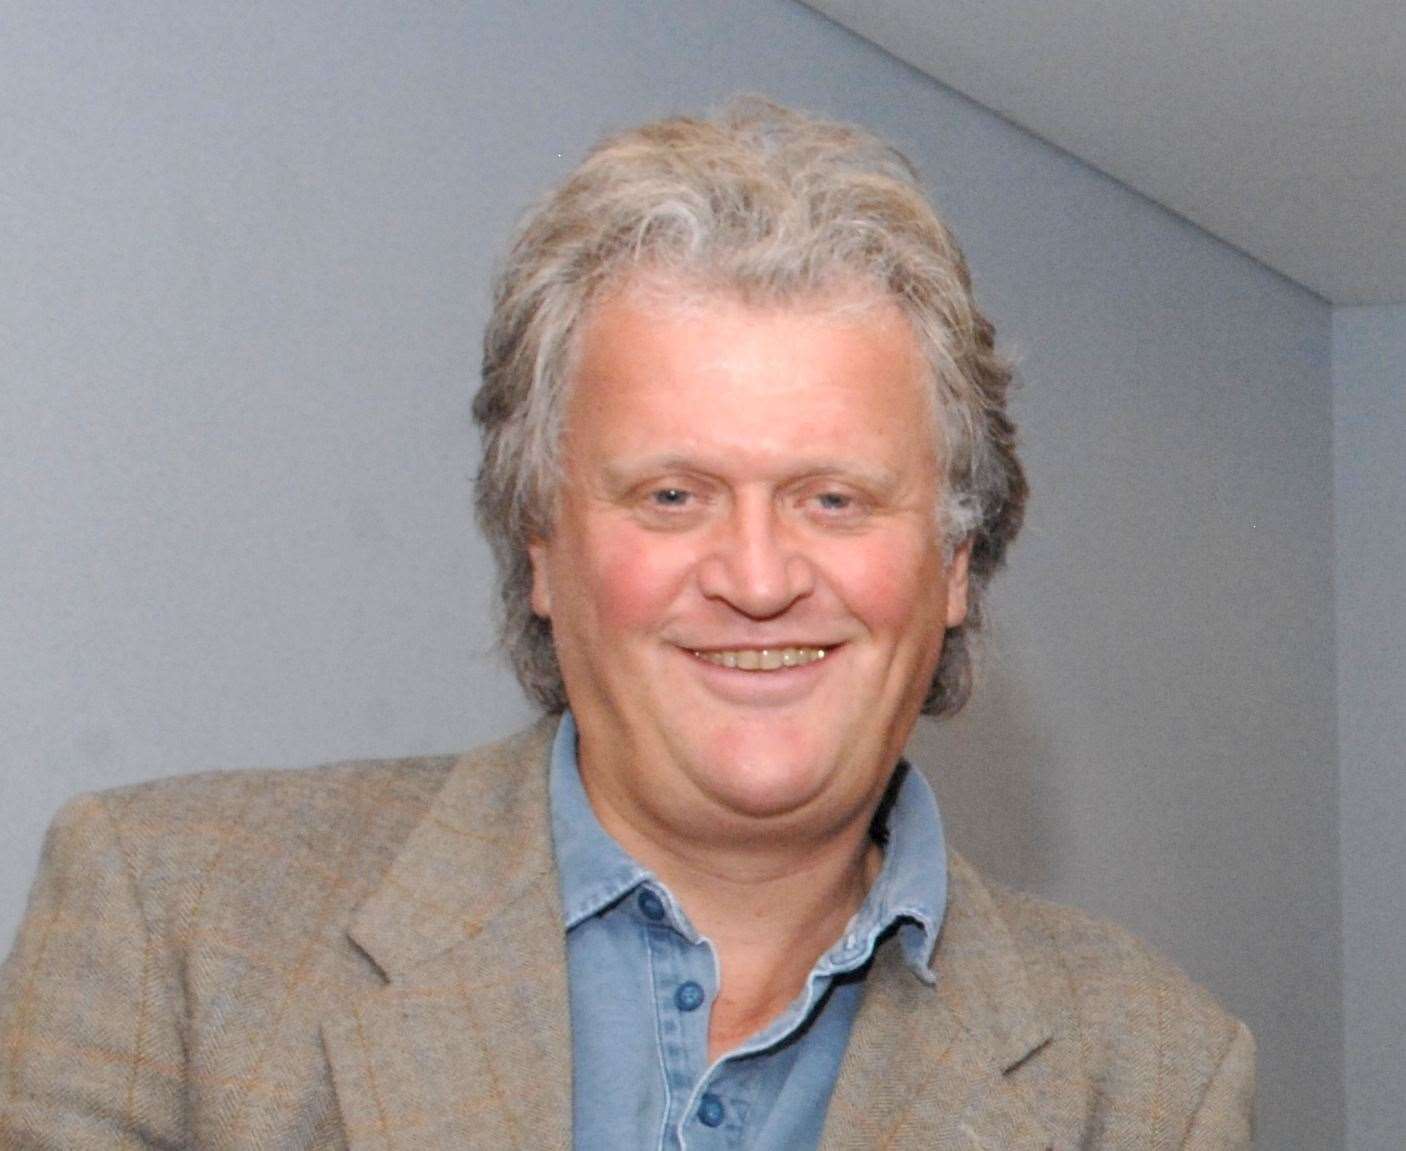 Tim Martin understands if staff want to take jobs with supermarkets